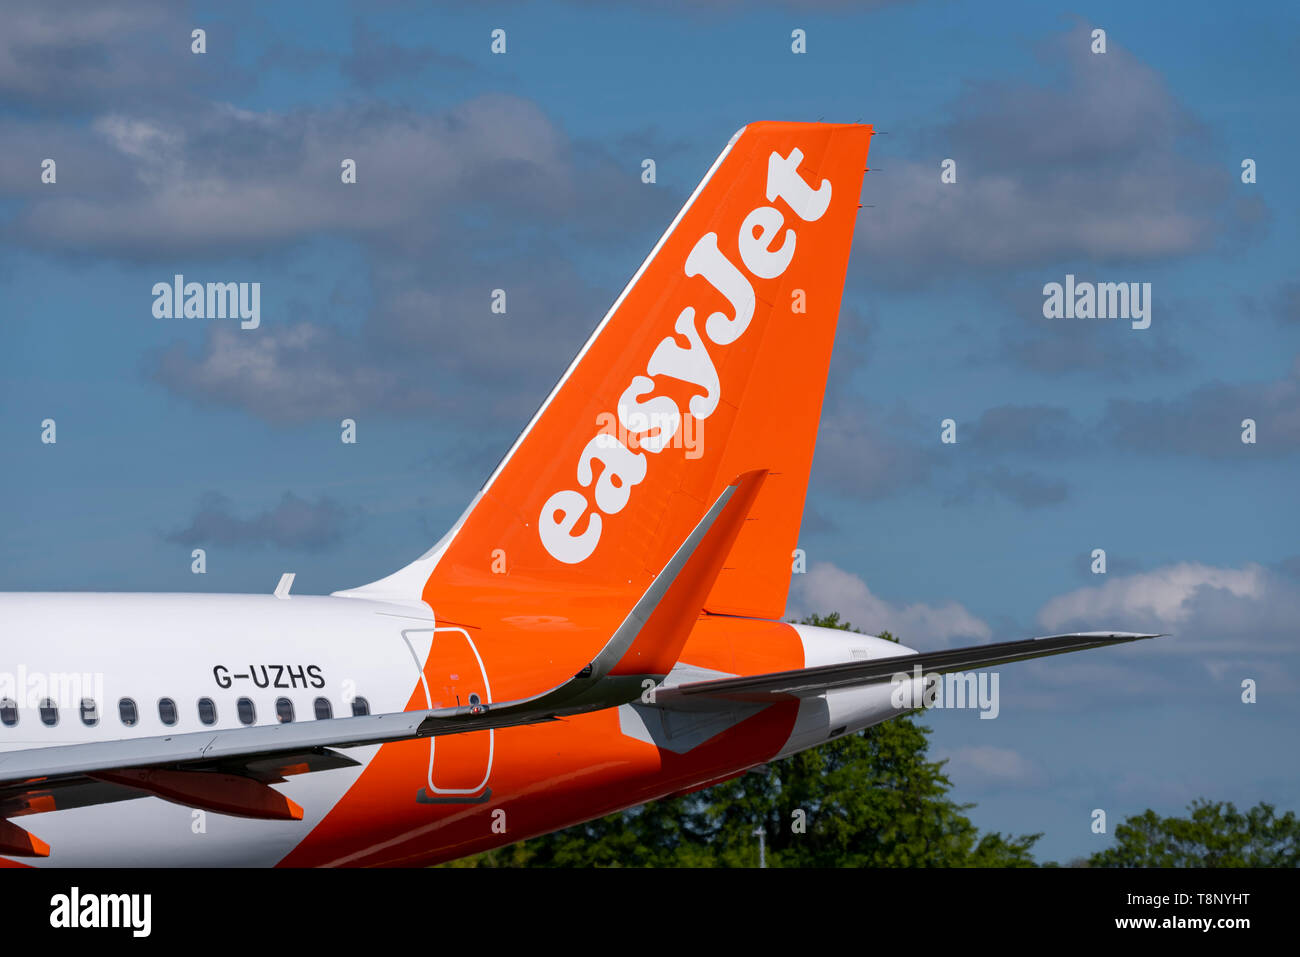 easyJet Airbus A321 jet airliner plane G-UZHS at London Southend Airport, Essex, UK. Budget airline. Tail with logo titles Stock Photo